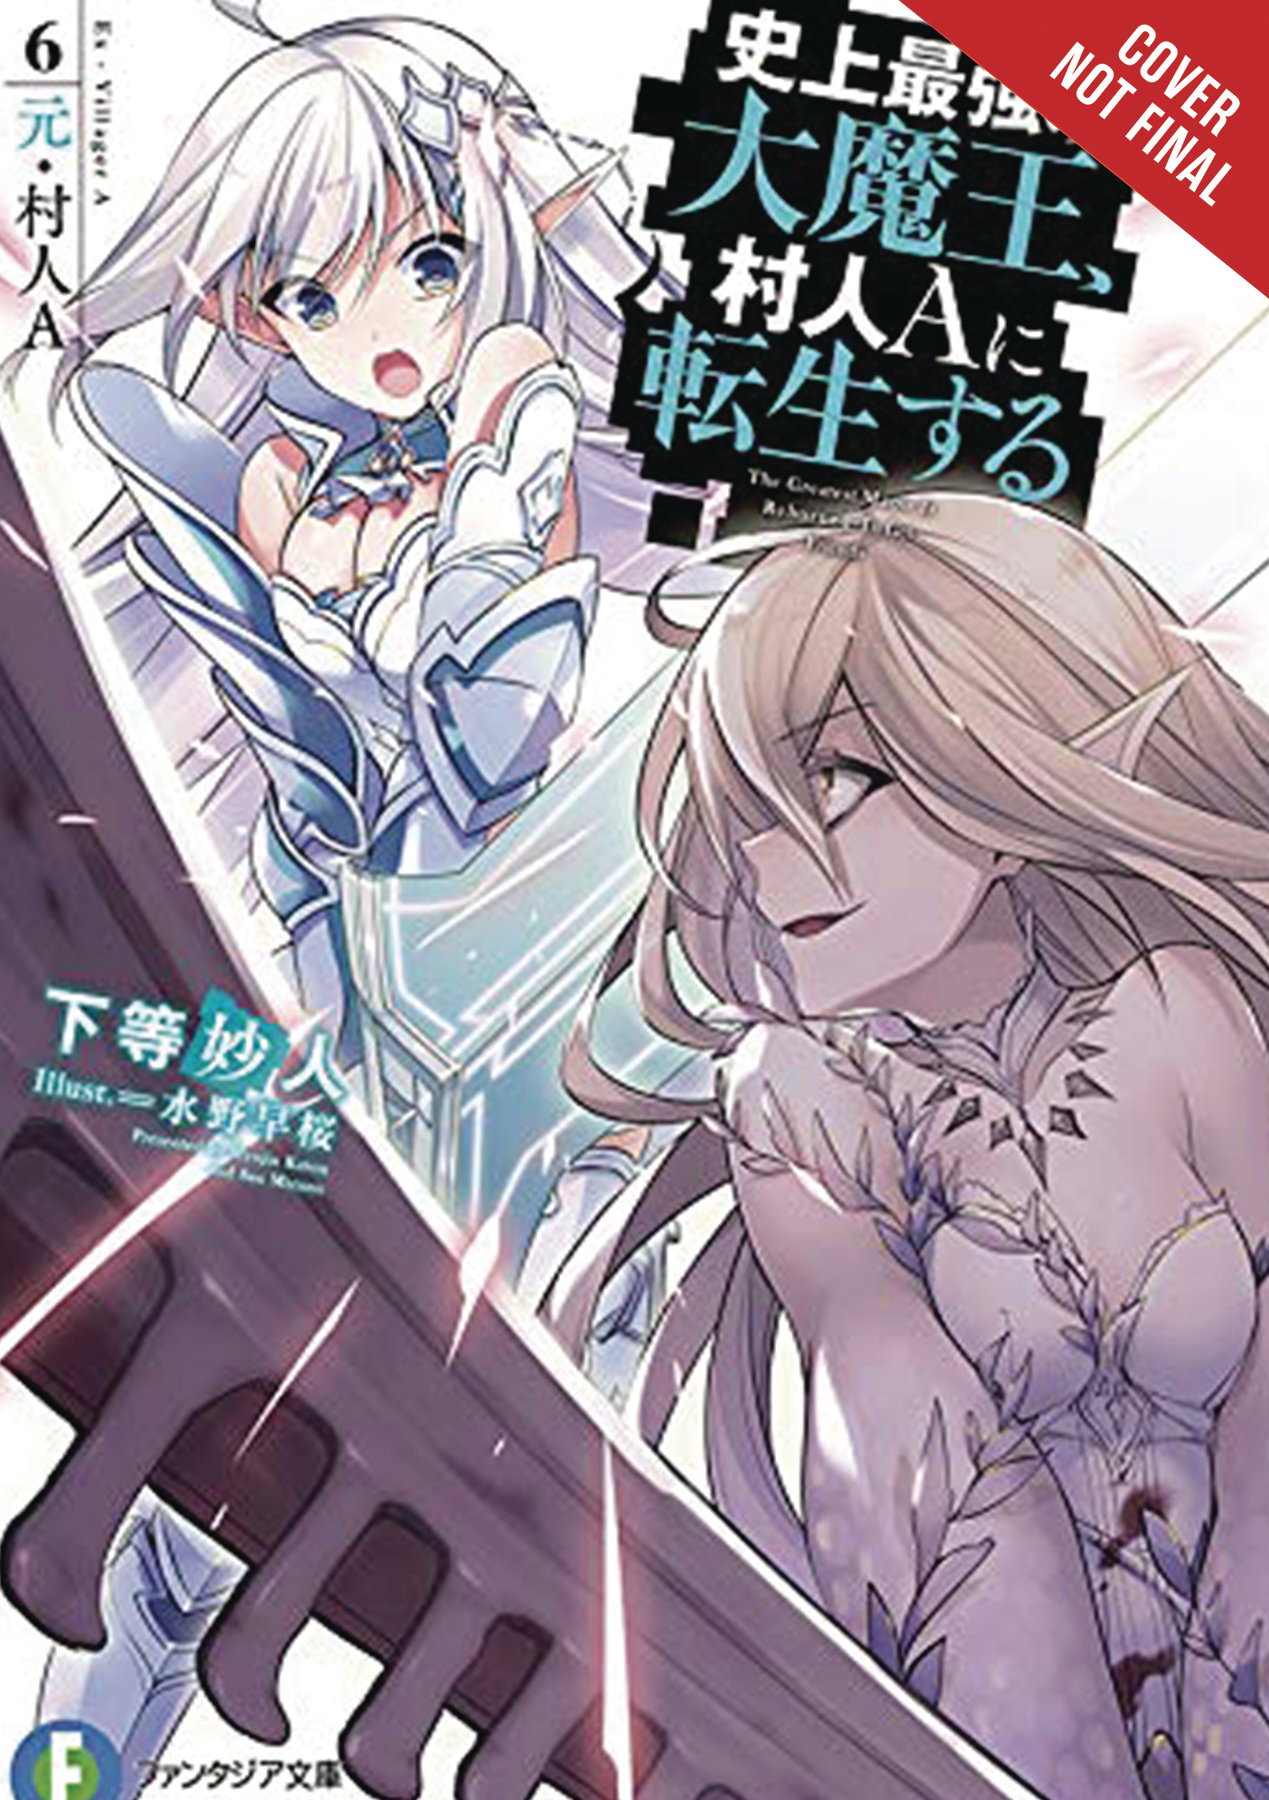 The Greatest Demon Lord is Reborn as a Typical Nobody Light Novel Volume 6 (Mature)